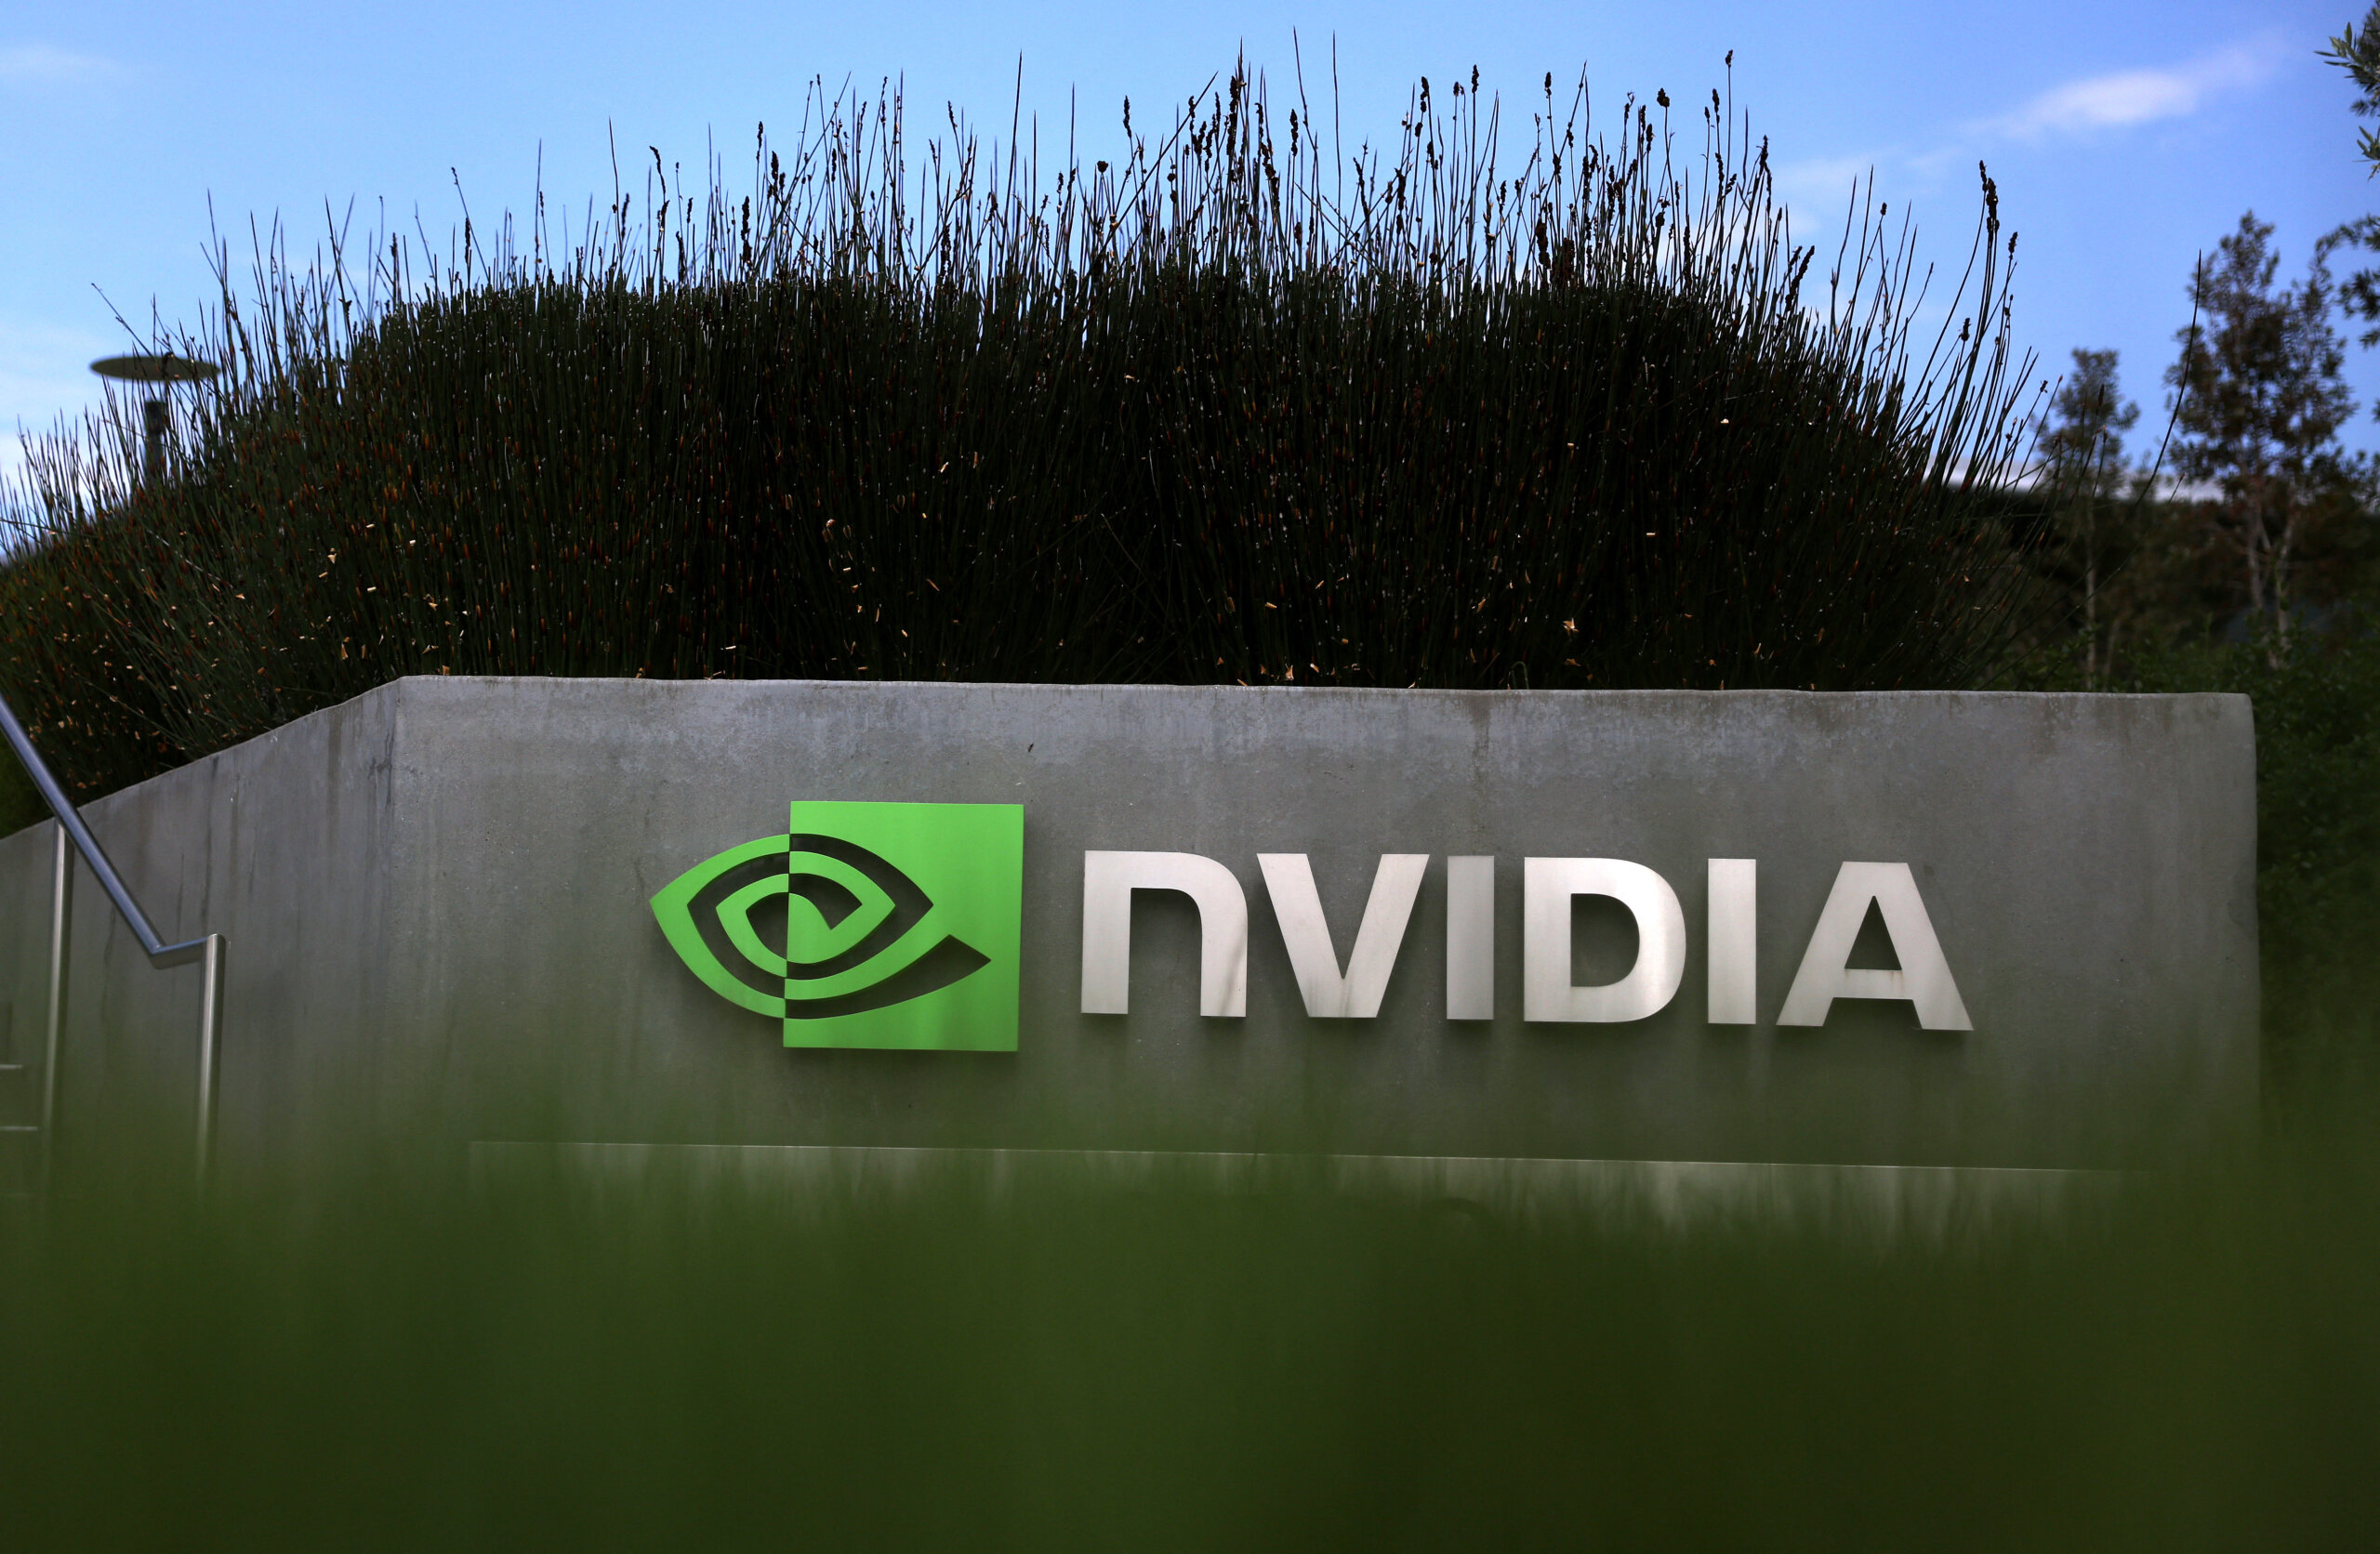 Nvidia saw a record revenue of US$13.51 billion in its second-quarter earnings, up 88% from Q1 and 101% from a year ago. (Photo by JUSTIN SULLIVAN / GETTY IMAGES NORTH AMERICA / Getty Images via AFP)